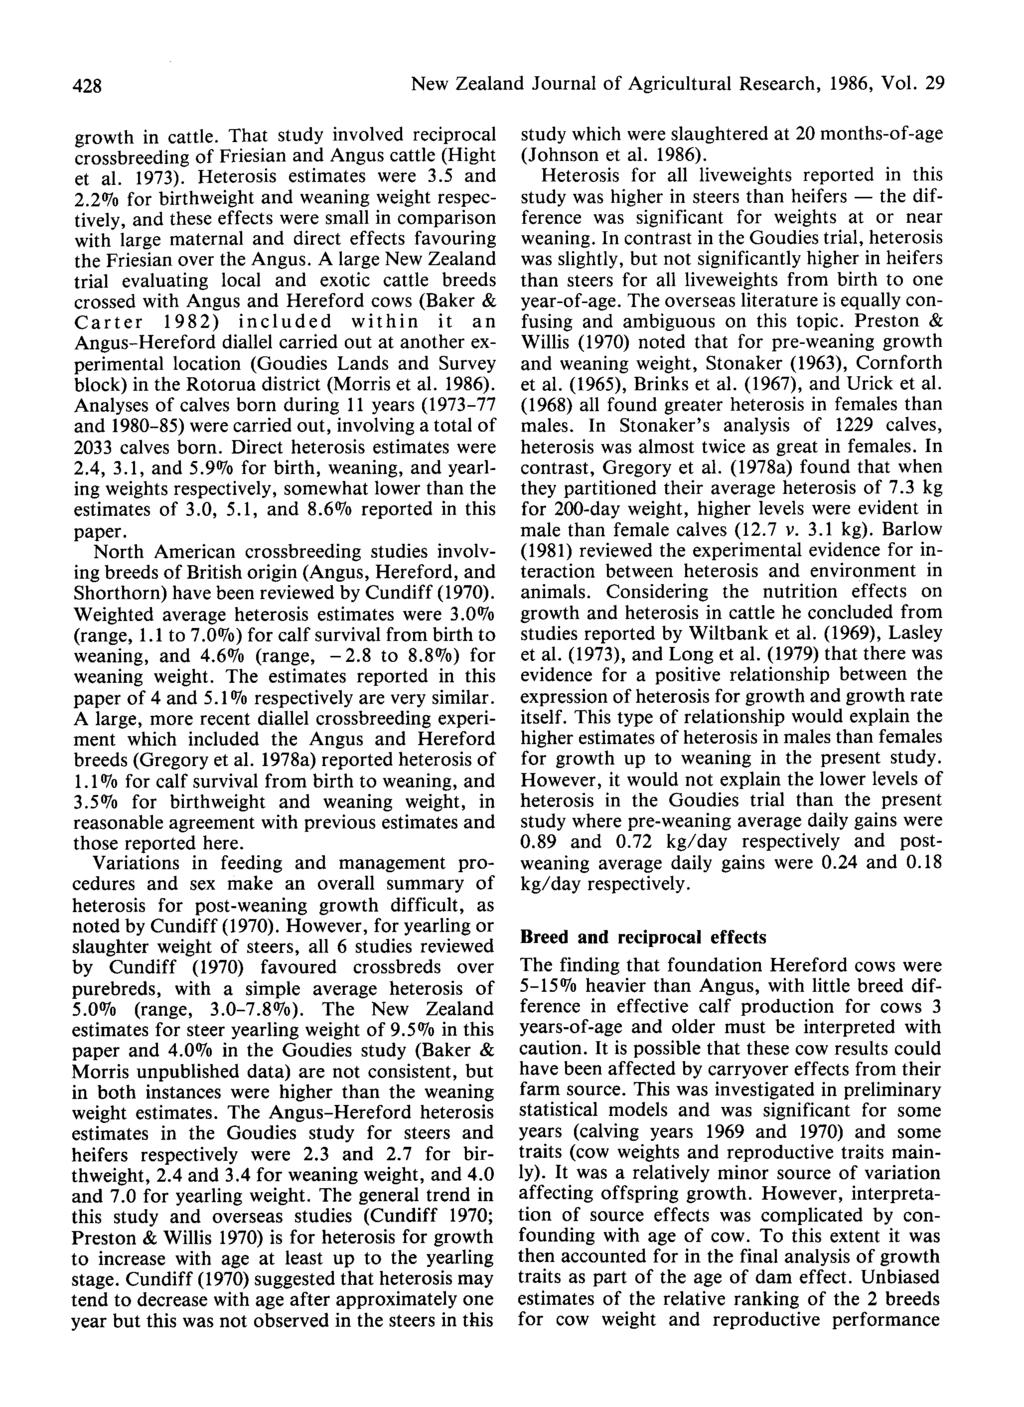 428 New Zealand Journal of Agricultural Research, 1986, Vol. 29 growth in cattle. That study involved reciprocal crossbreeding of Friesian and Angus cattle (Hight et al. 1973).